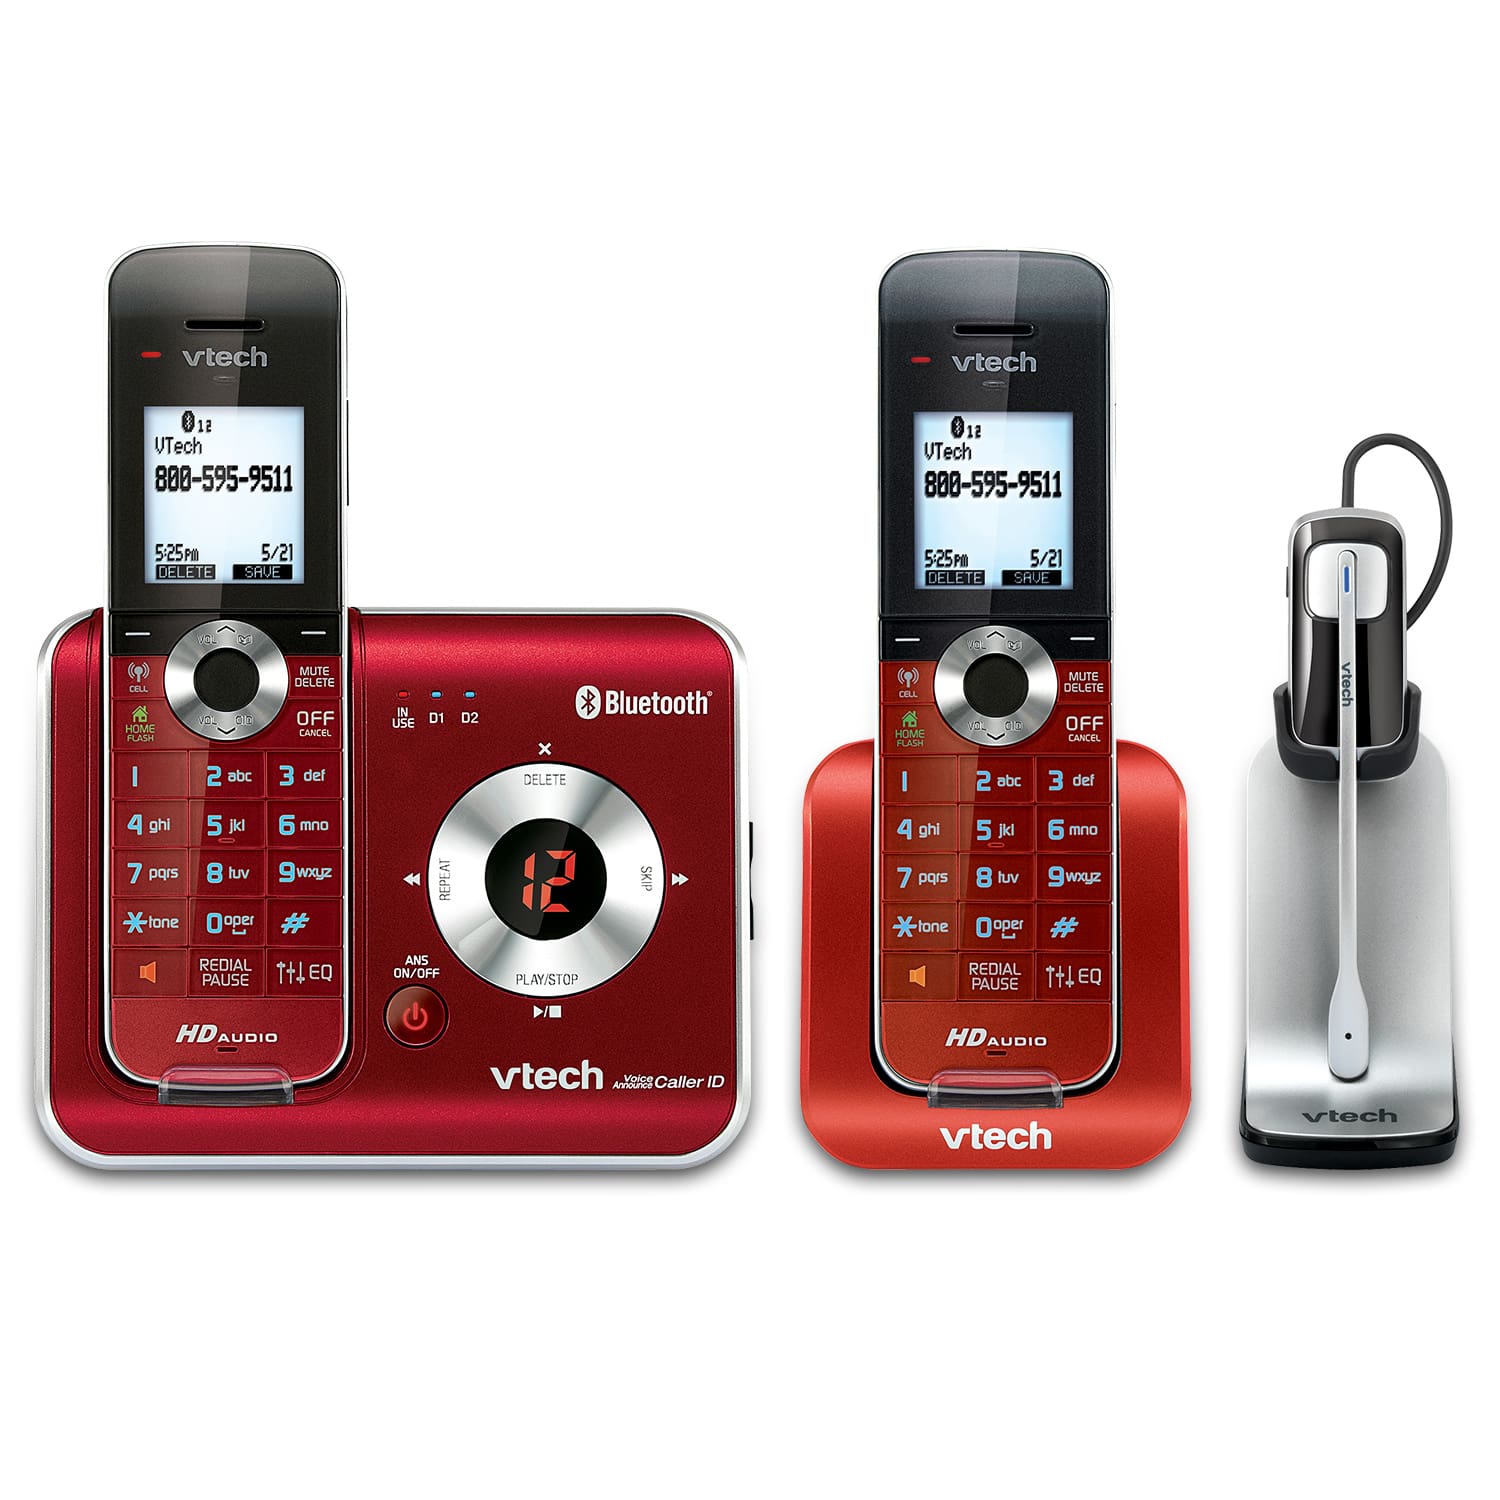 2 Handset Connect to Cell™ Phone System with Cordless Headset - view 1